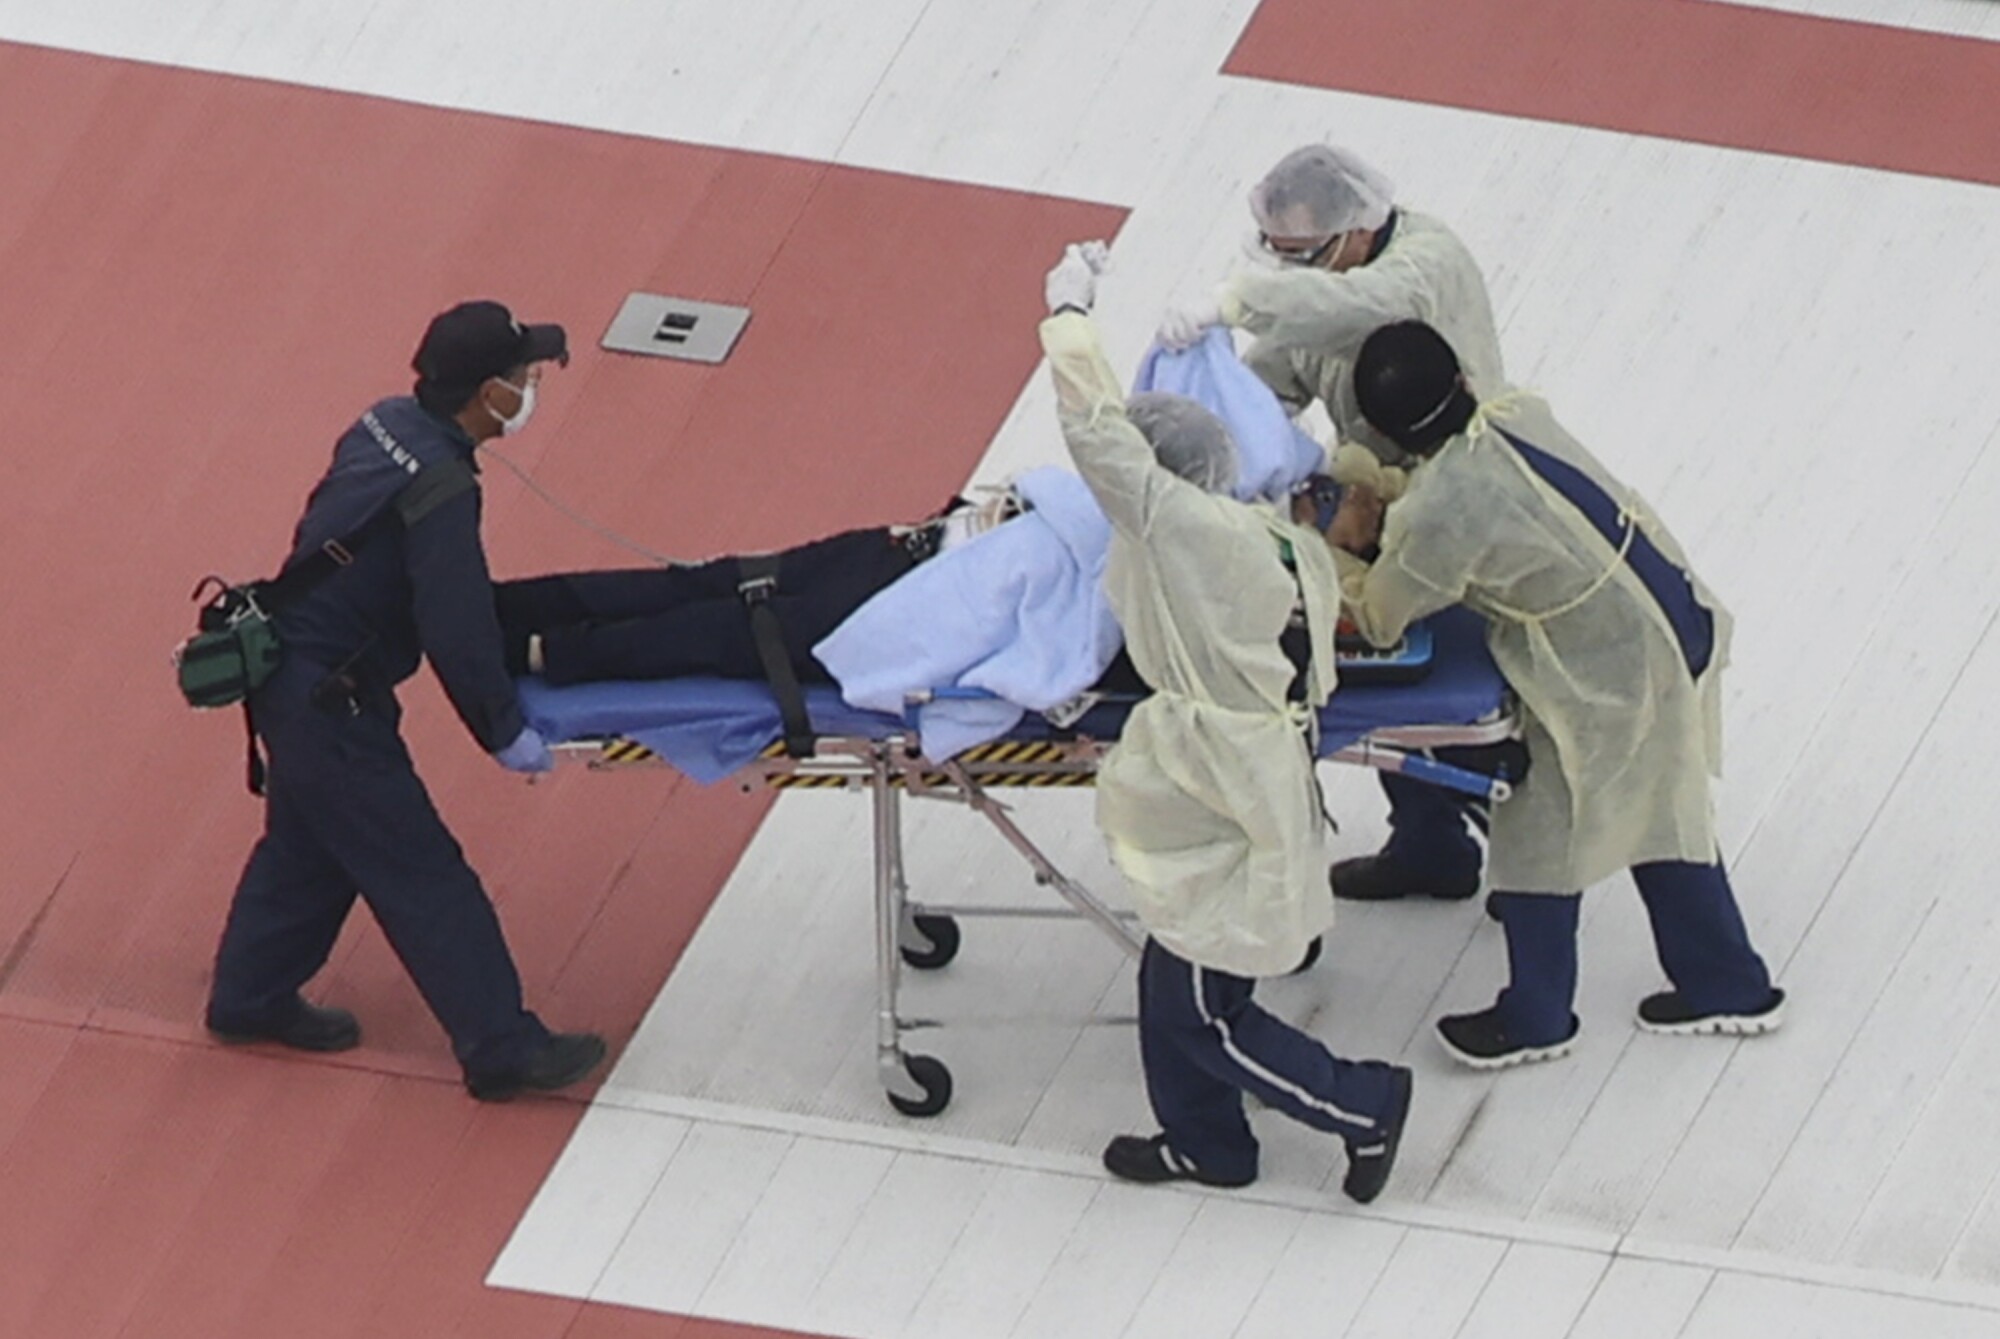 Abe is taken on a stretcher after arriving at the hospital by helicopter.